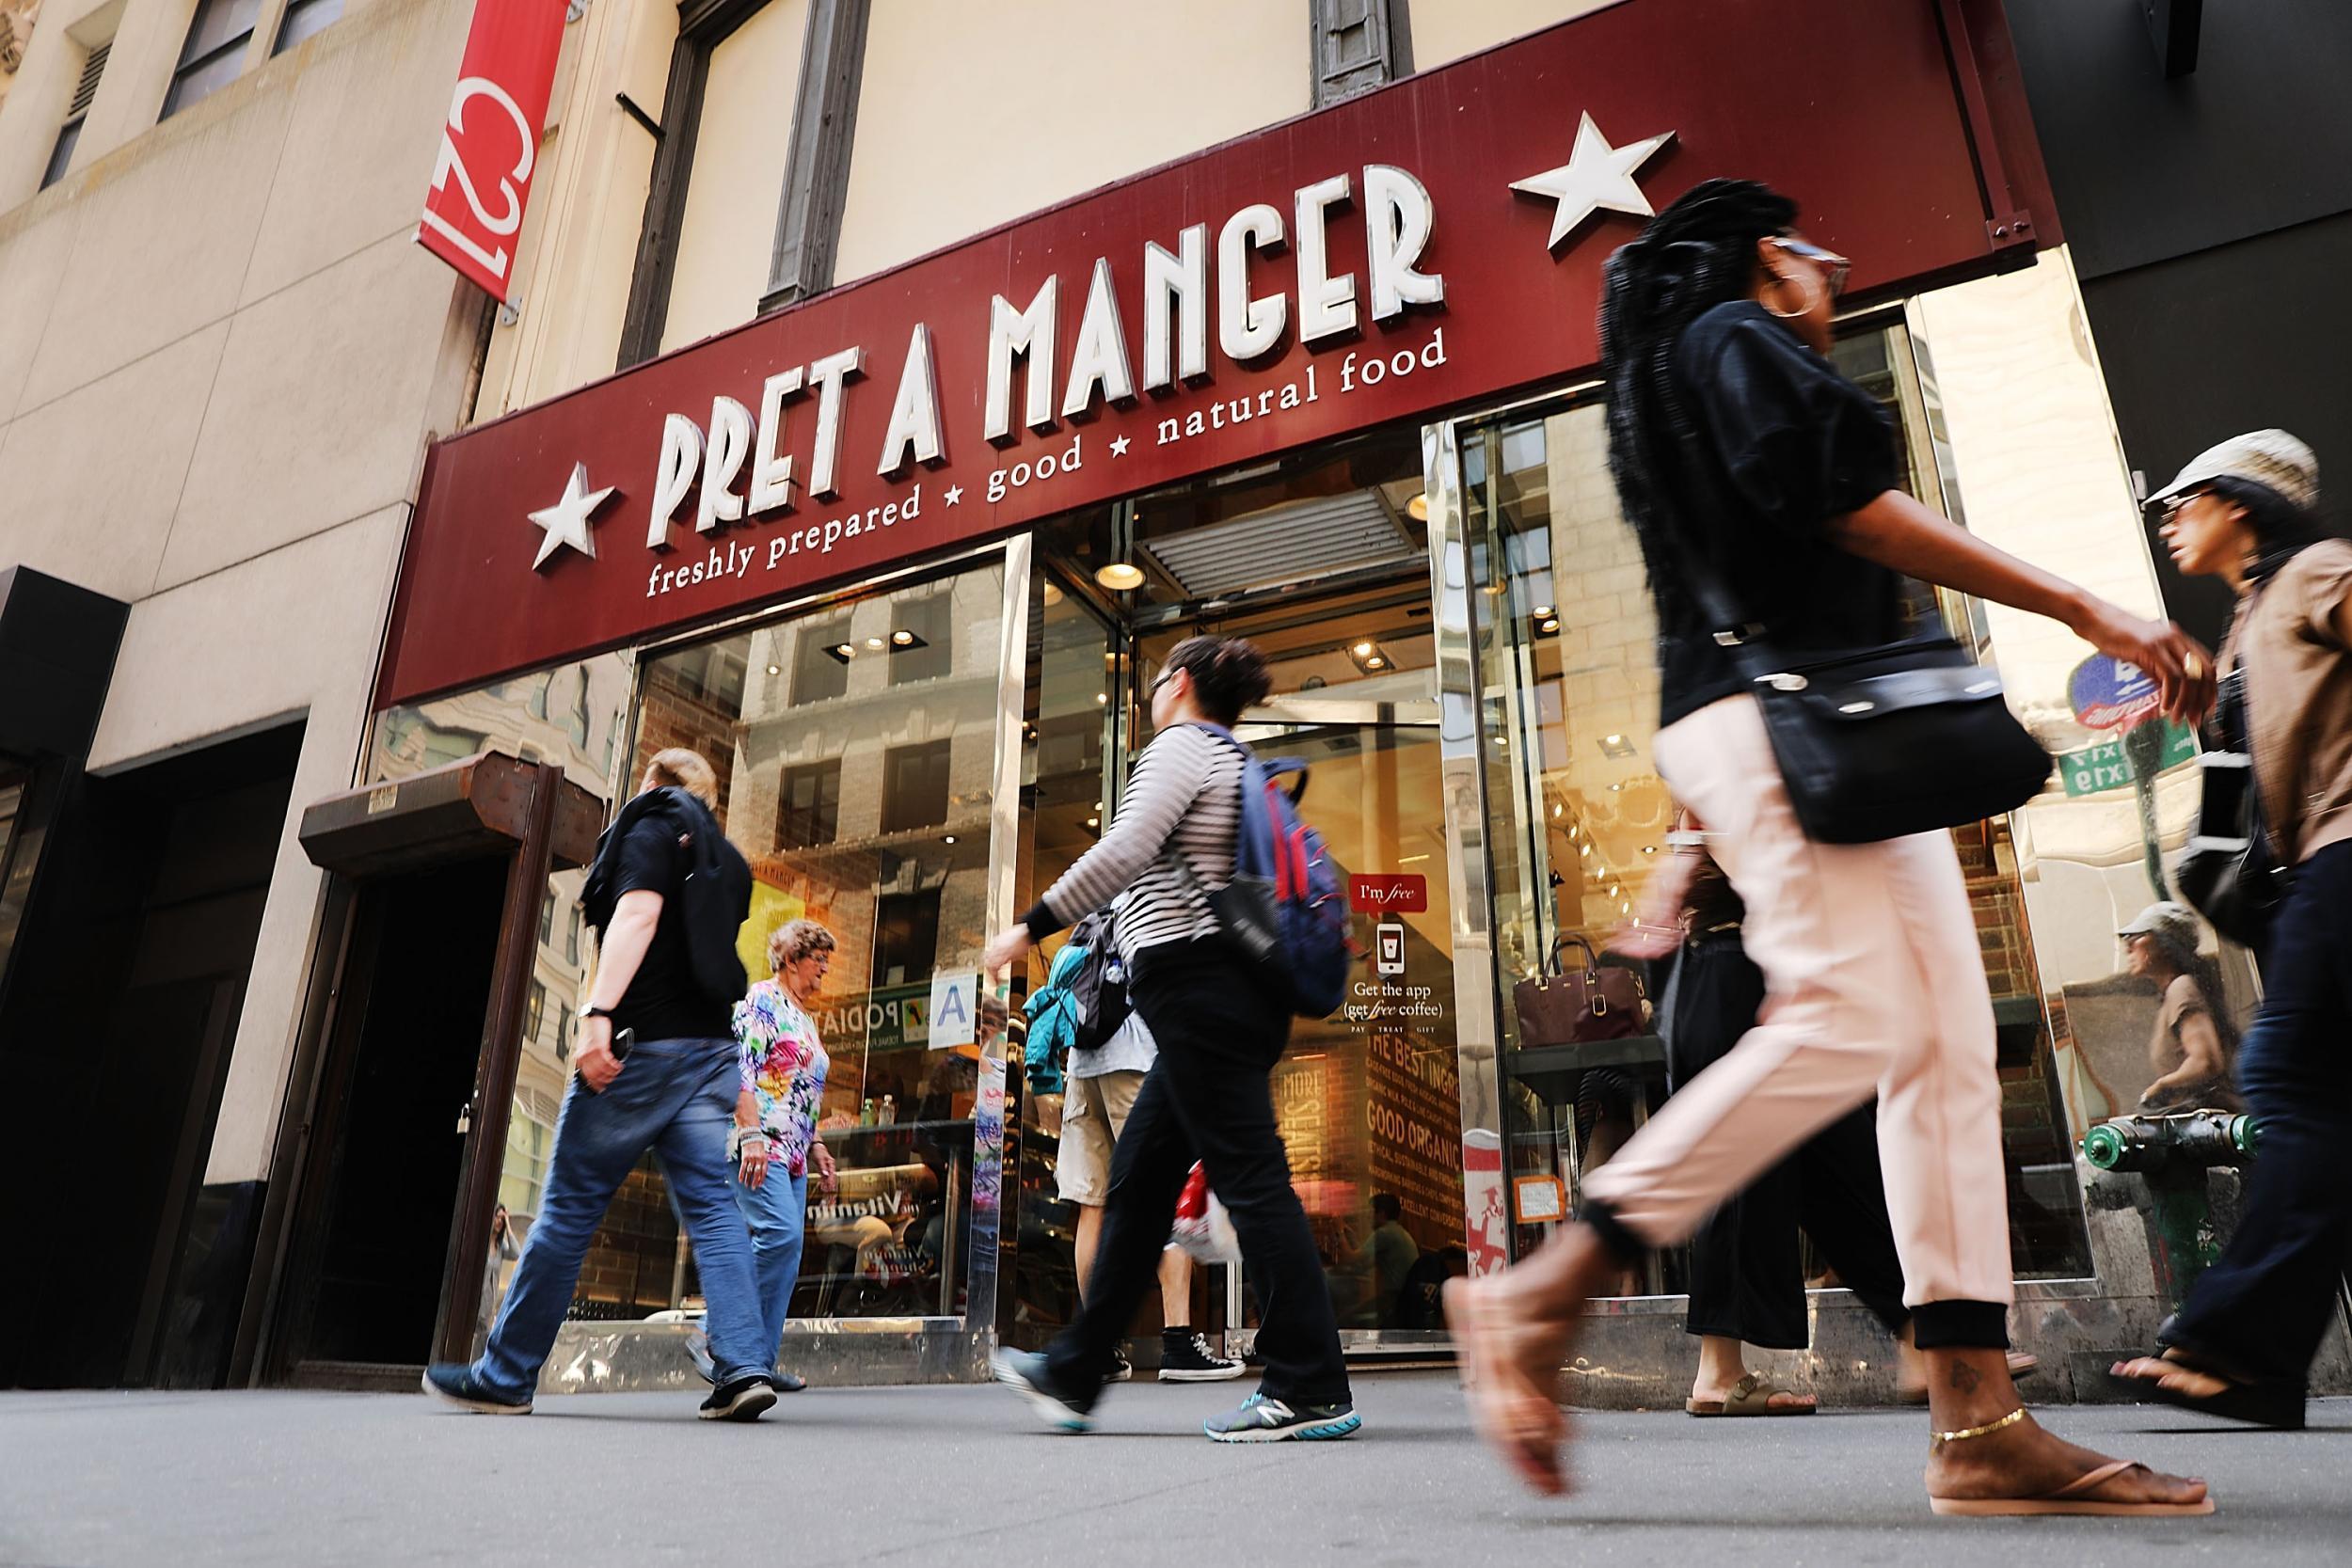 Pret has come under fire after news emerged that two customers died after eating at the chain